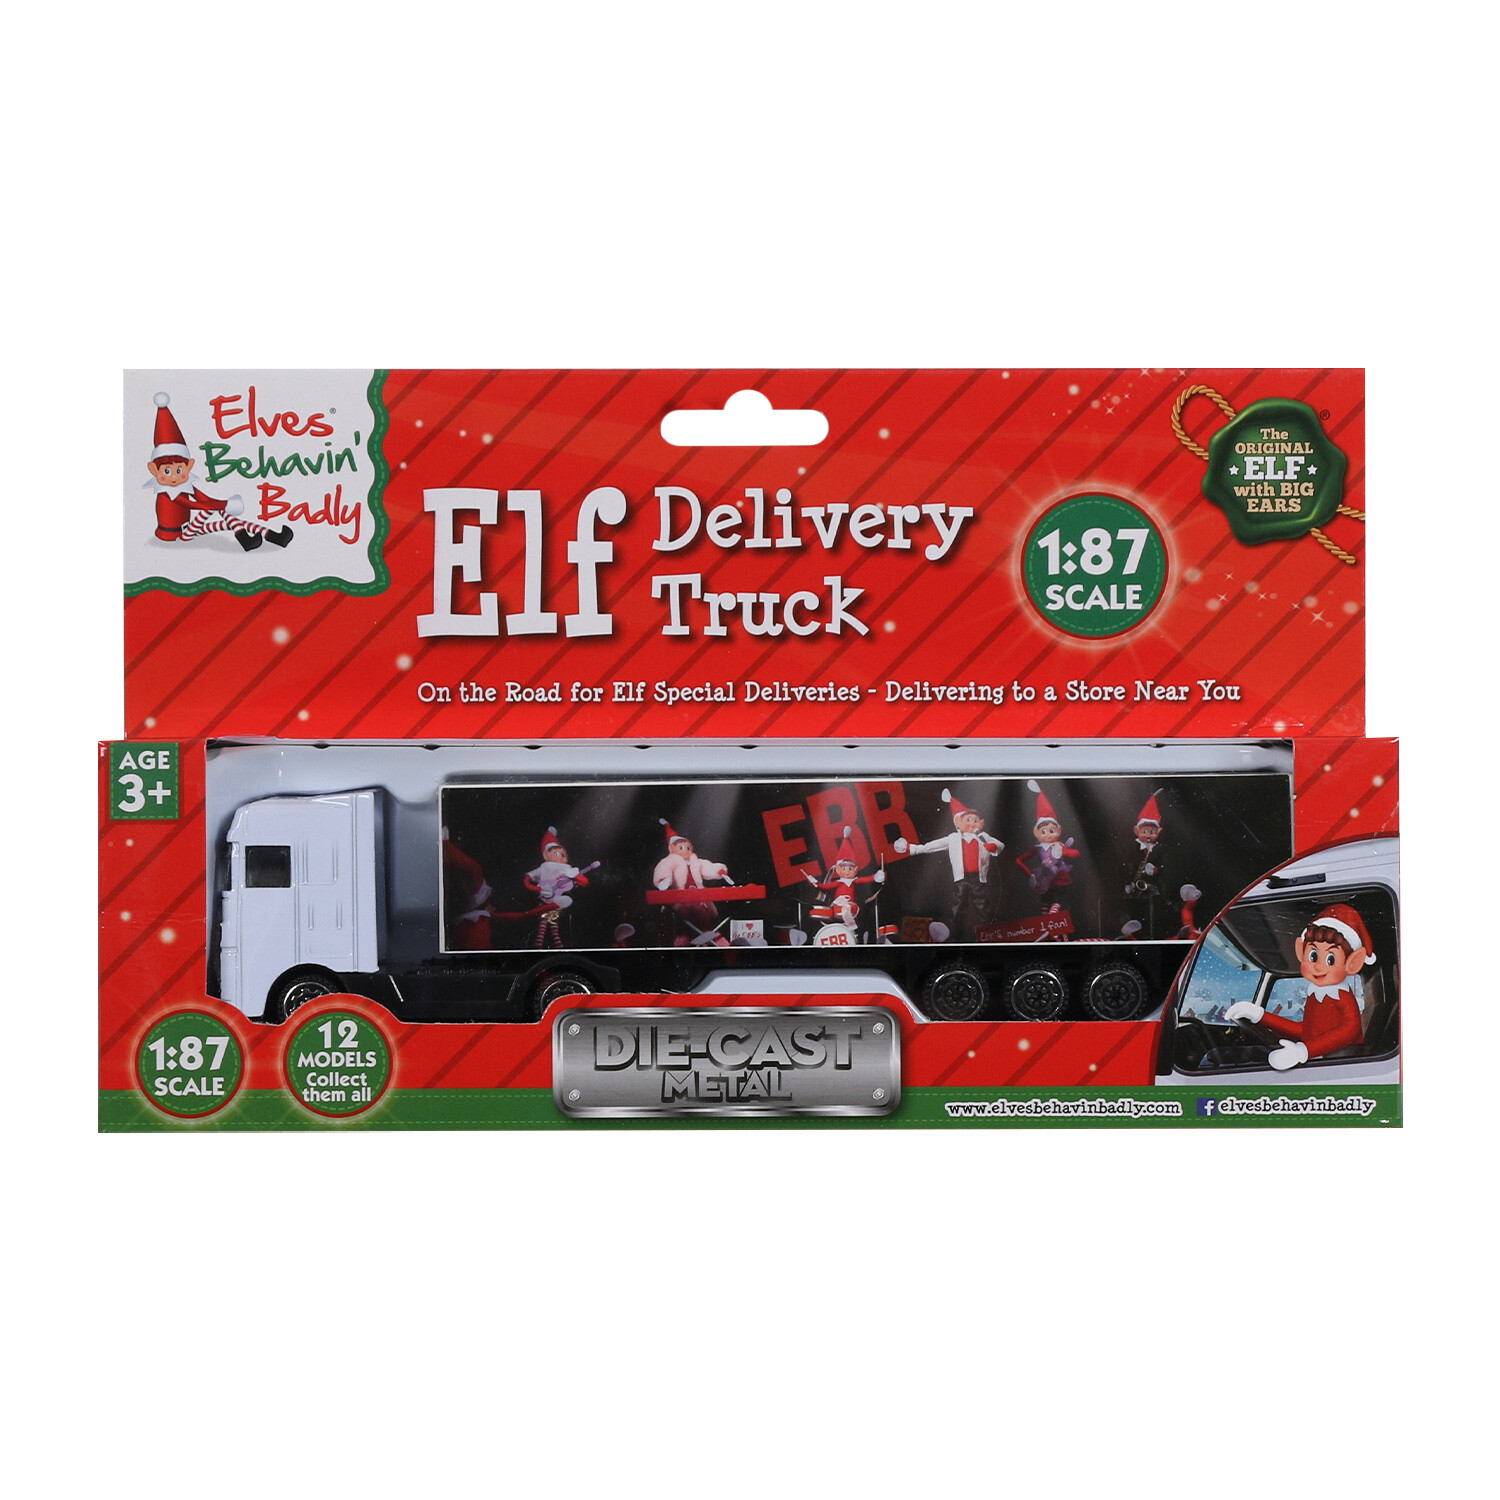 Elf Delivery Truck Image 8